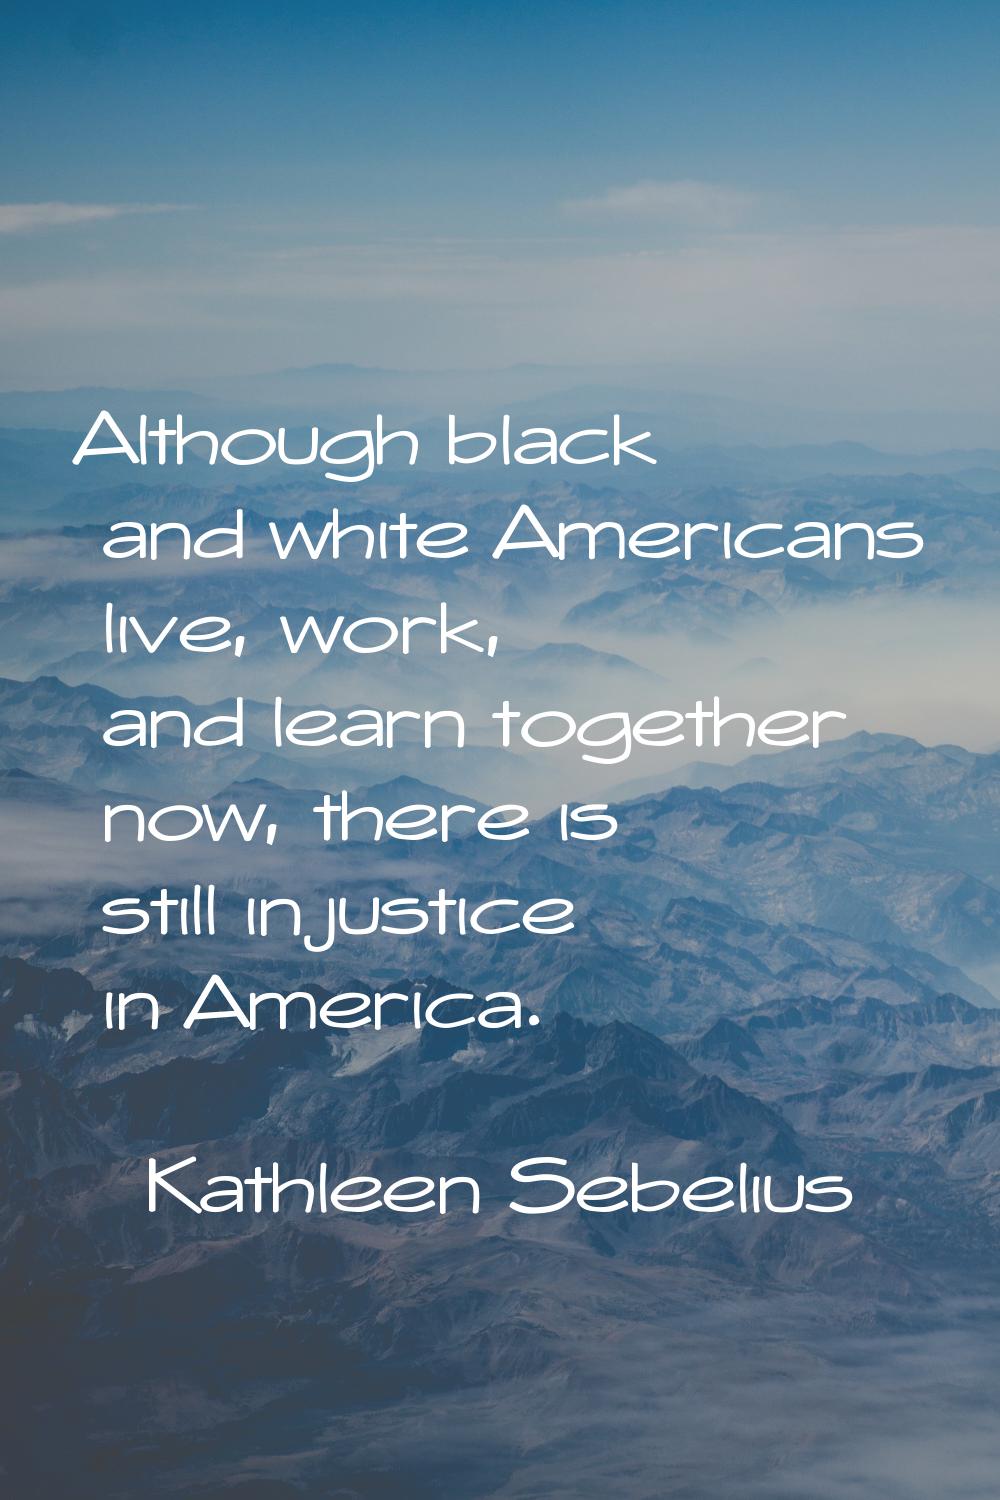 Although black and white Americans live, work, and learn together now, there is still injustice in 